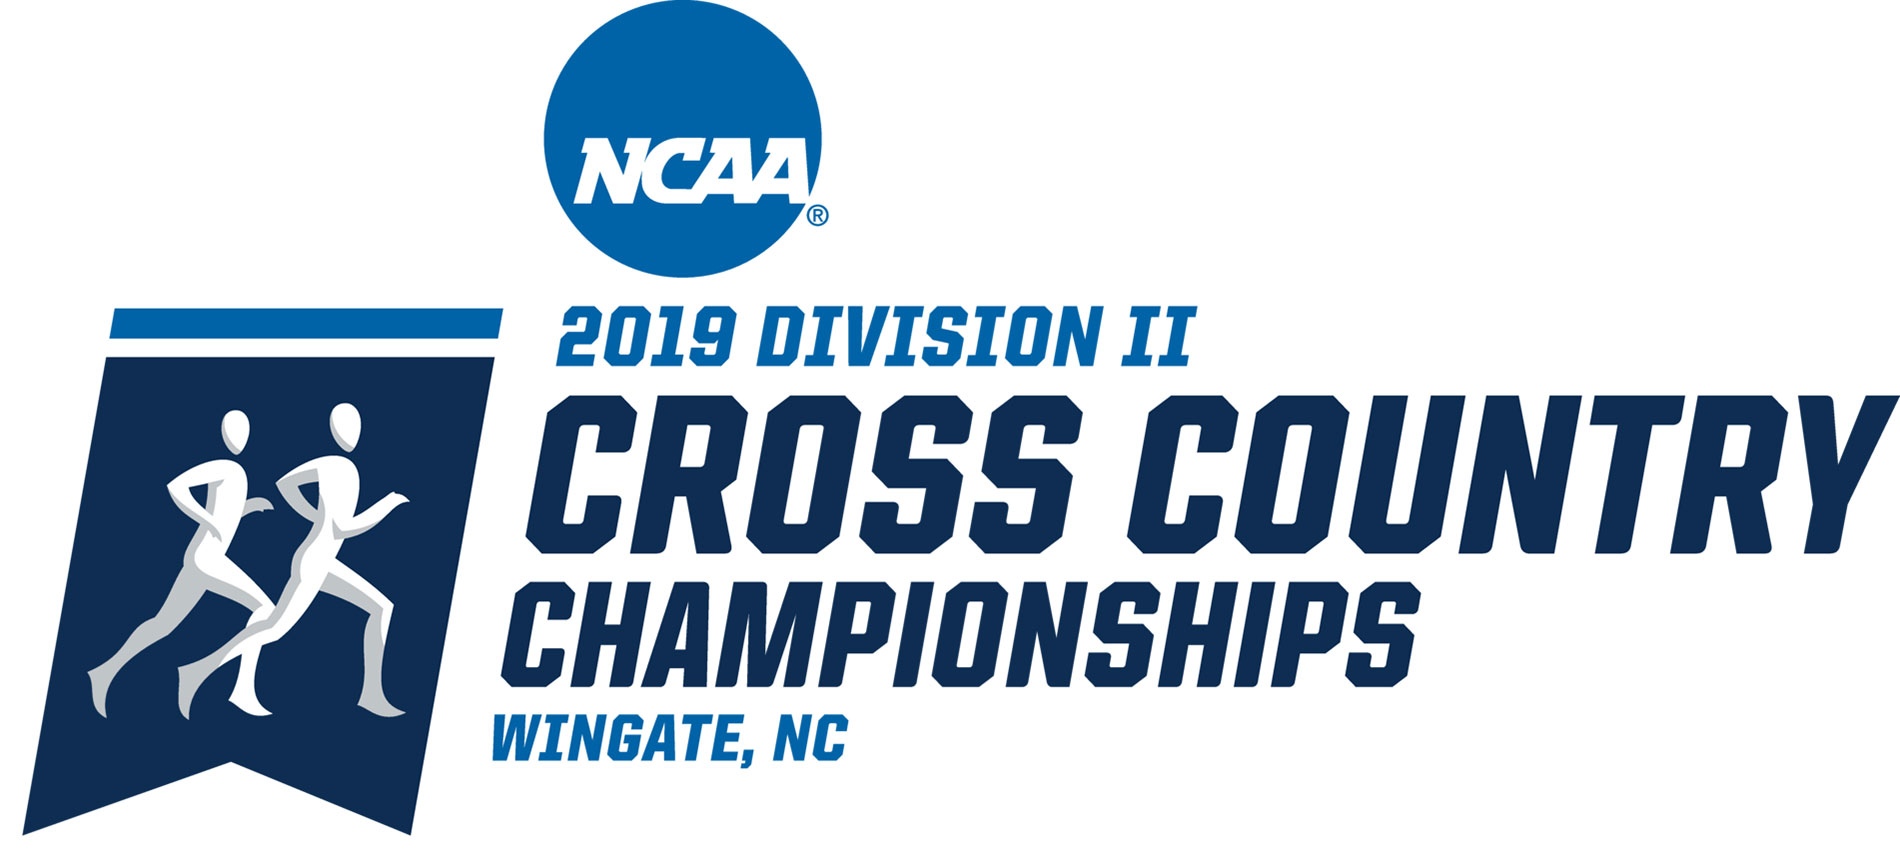 Women’s Cross Country Narrowly Misses Third Straight Appearance at National Championships with Fourth-Place Showing at NCAA Southeast Regional